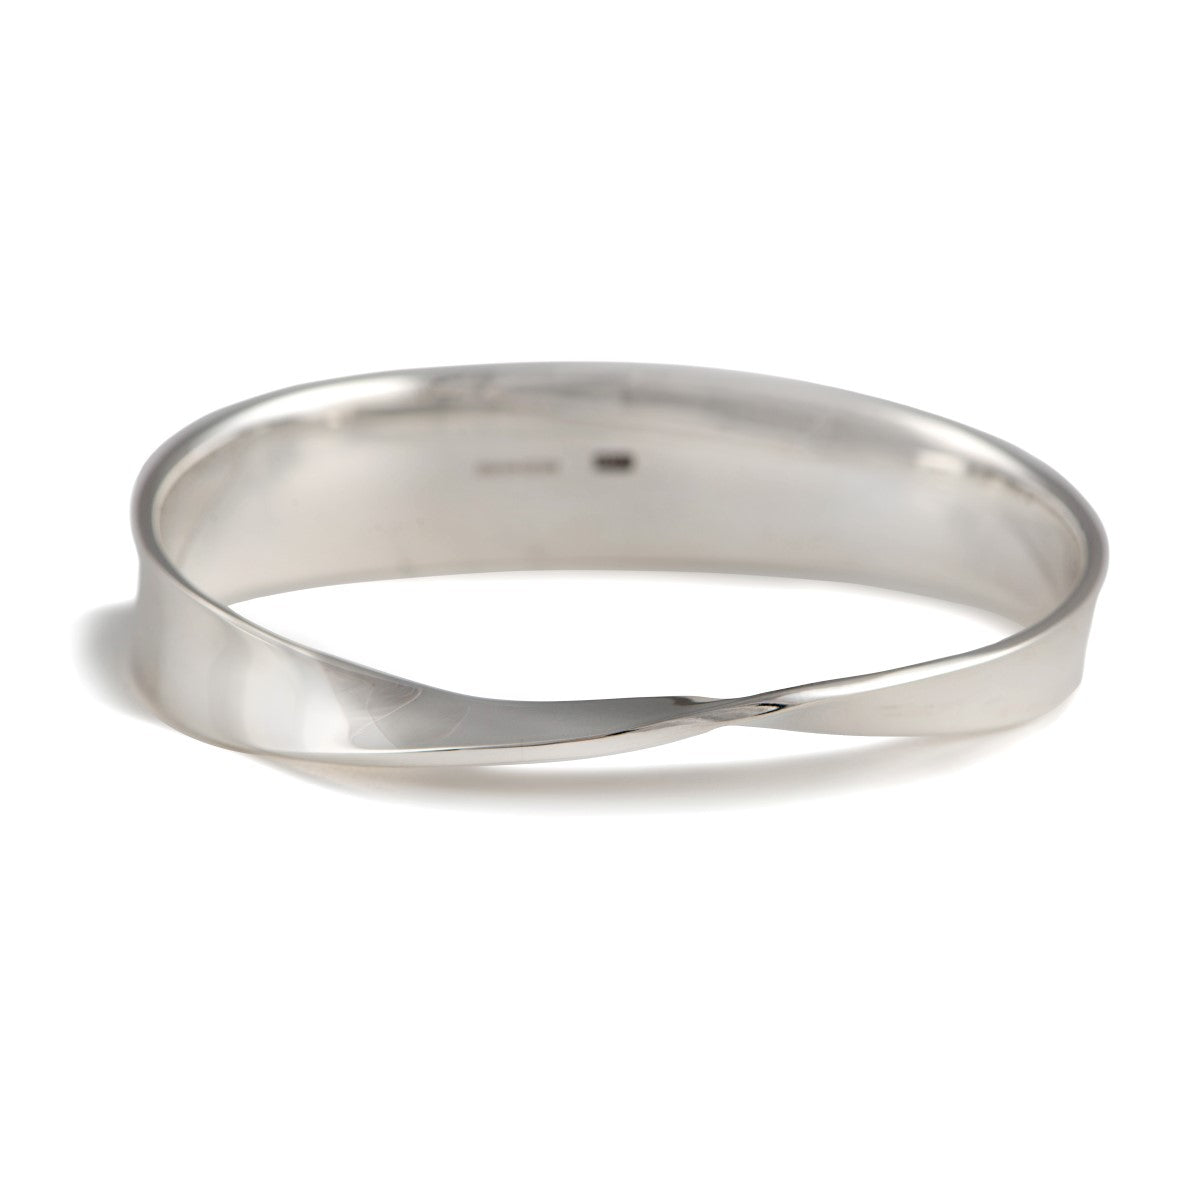 Heavy Sterling Silver Bangle With a Twist